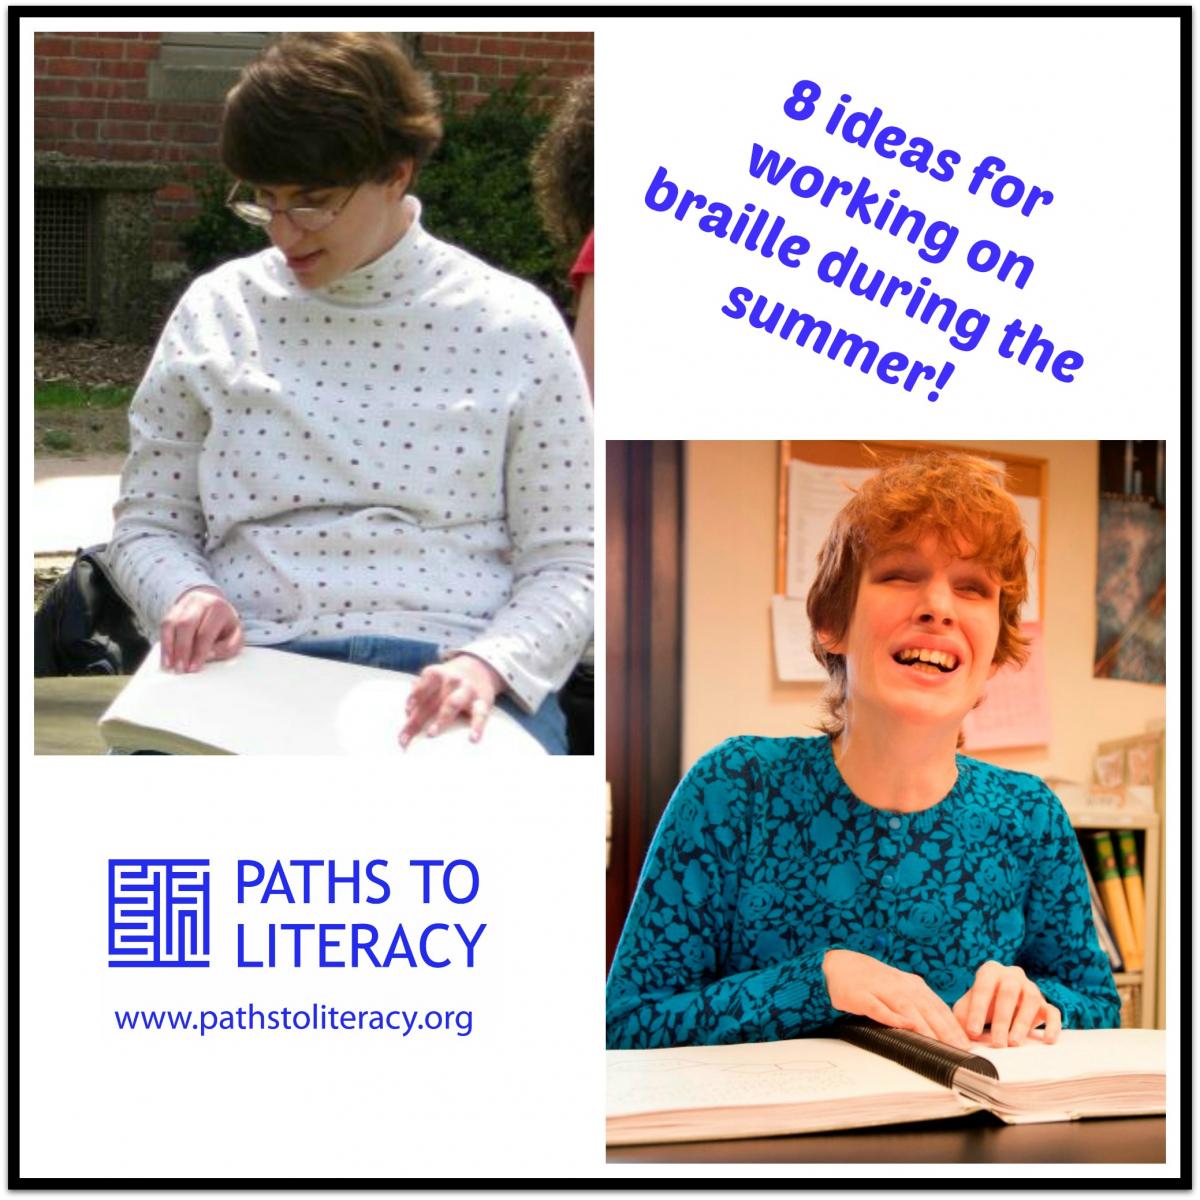 Collage for maintaining braille skills during summer